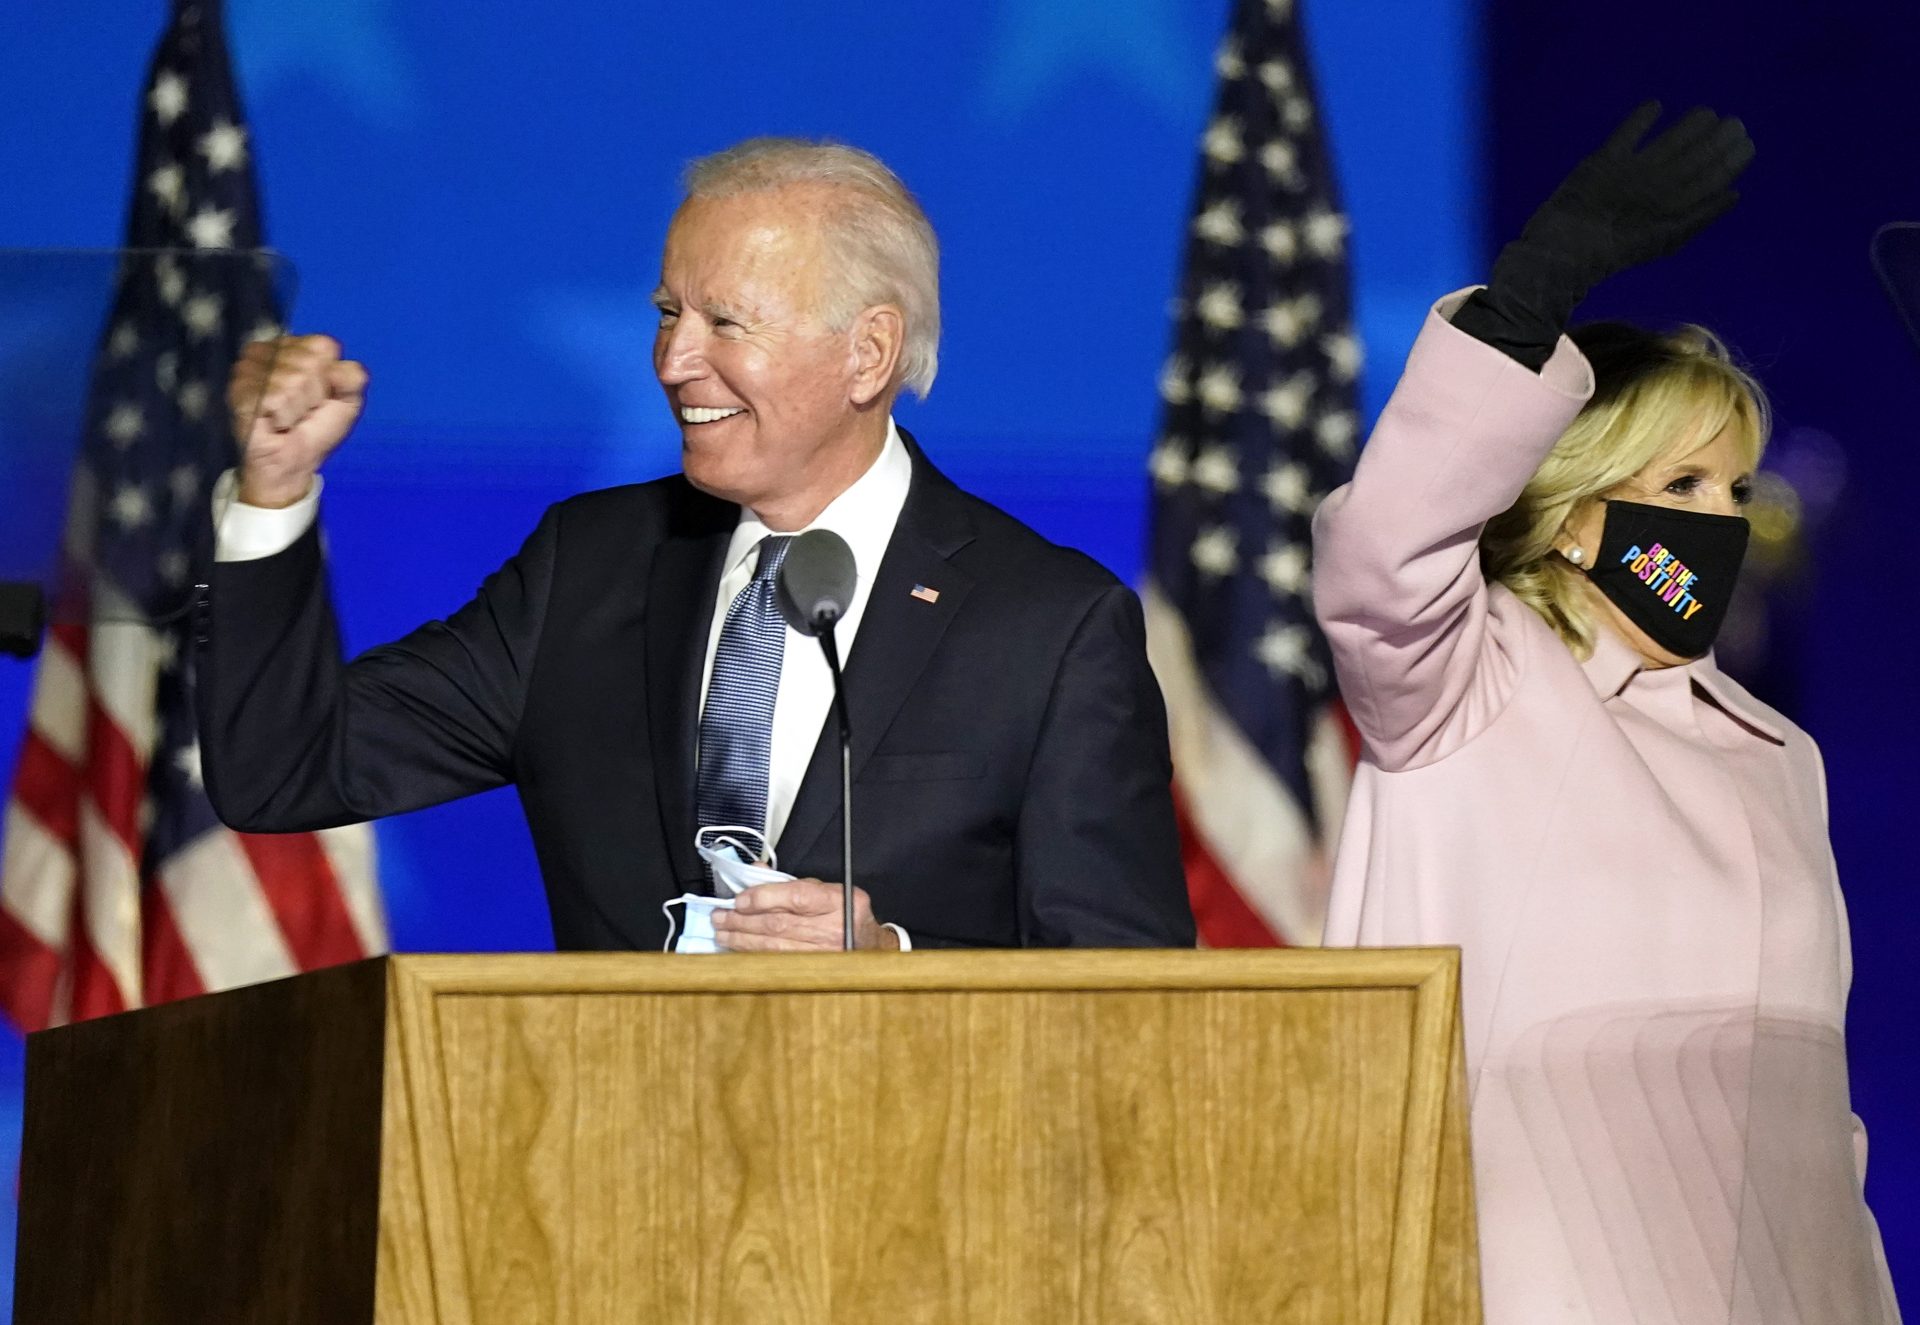 Democratic presidential candidate former Vice President Joe Biden arrives with his wife Jill Biden to speak to supporters Wednesday, Nov. 4, 2020, in Wilmington, Del.